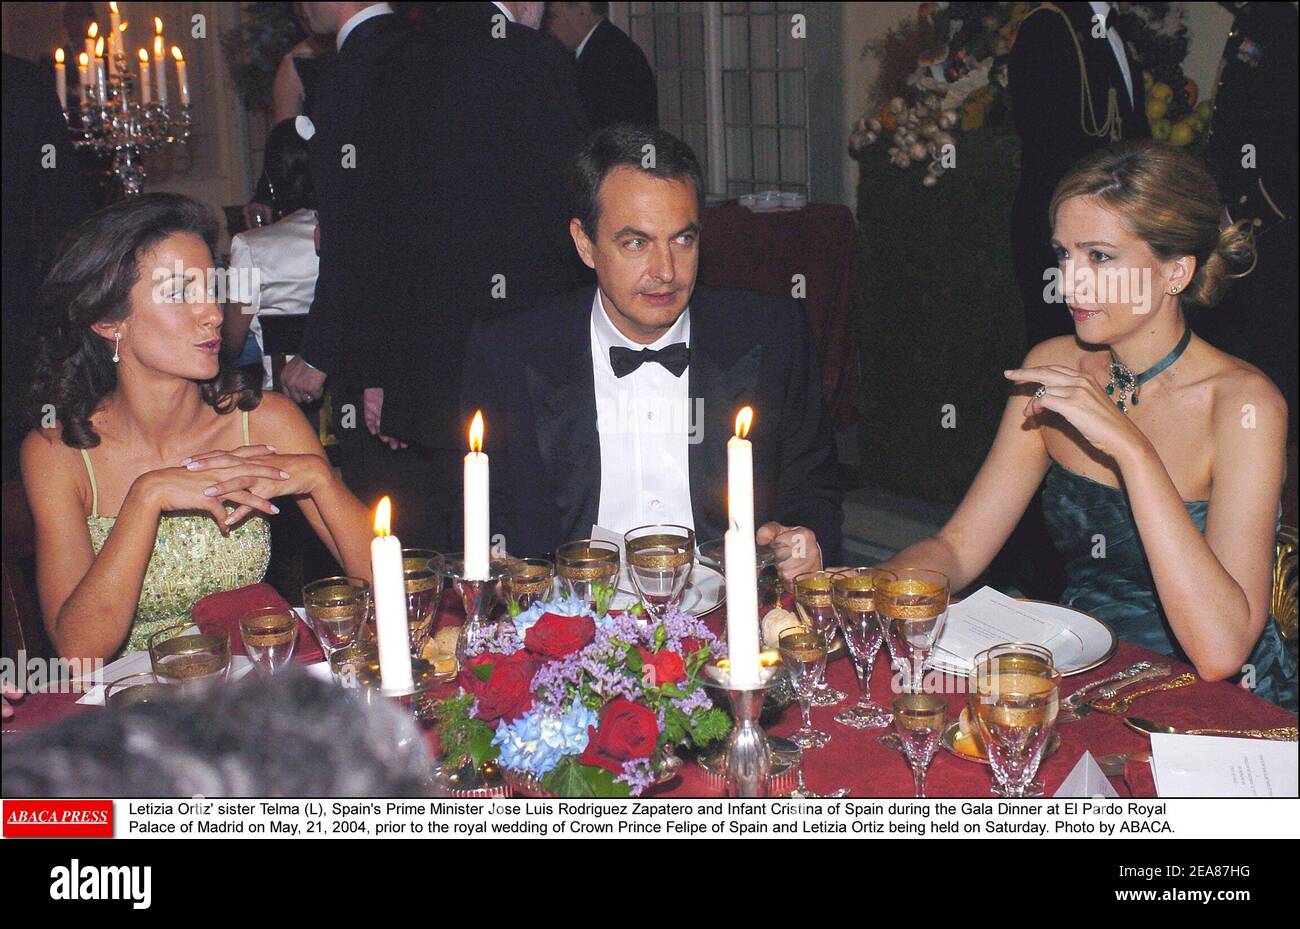 Letizia Ortiz' sister Telma (L), Spain's Prime Minister Jose Luis Rodriguez Zapatero and Infant Cristina of Spain during the Gala Dinner at El Pardo Royal Palace of Madrid on May, 21, 2004, prior to the royal wedding of Crown Prince Felipe of Spain and Letizia Ortiz being held on Saturday. Photo by ABACA. Stock Photo